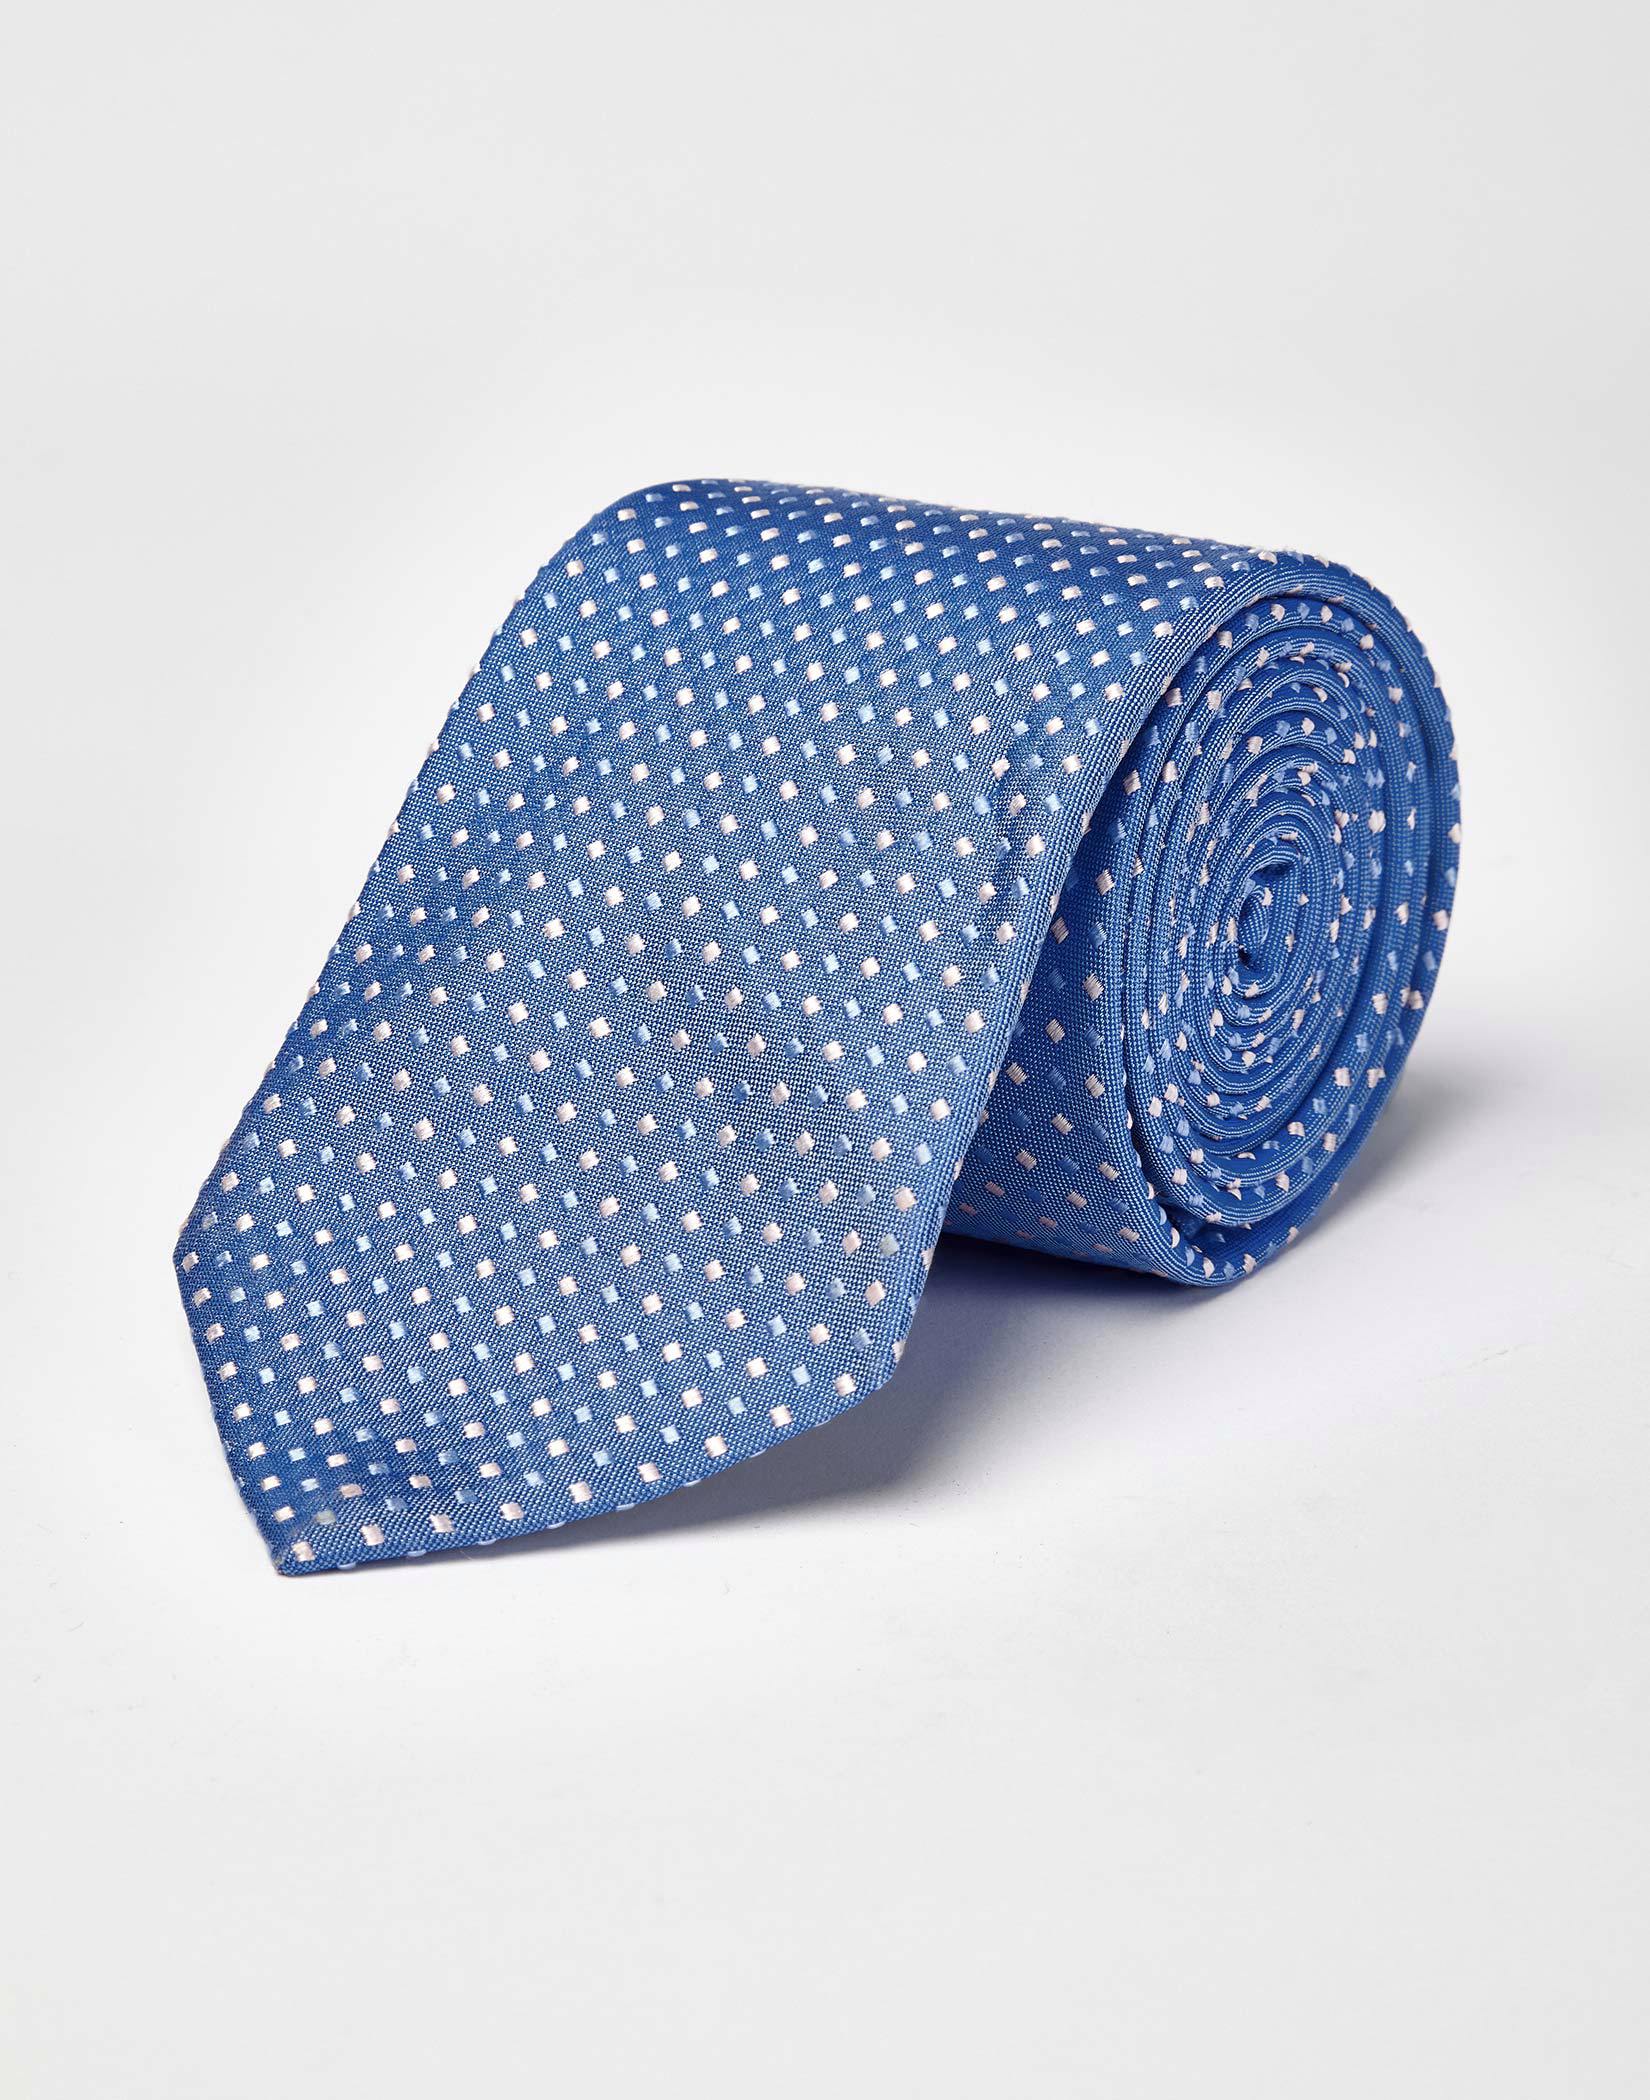 Pink Squares on Blue Woven Silk Tie